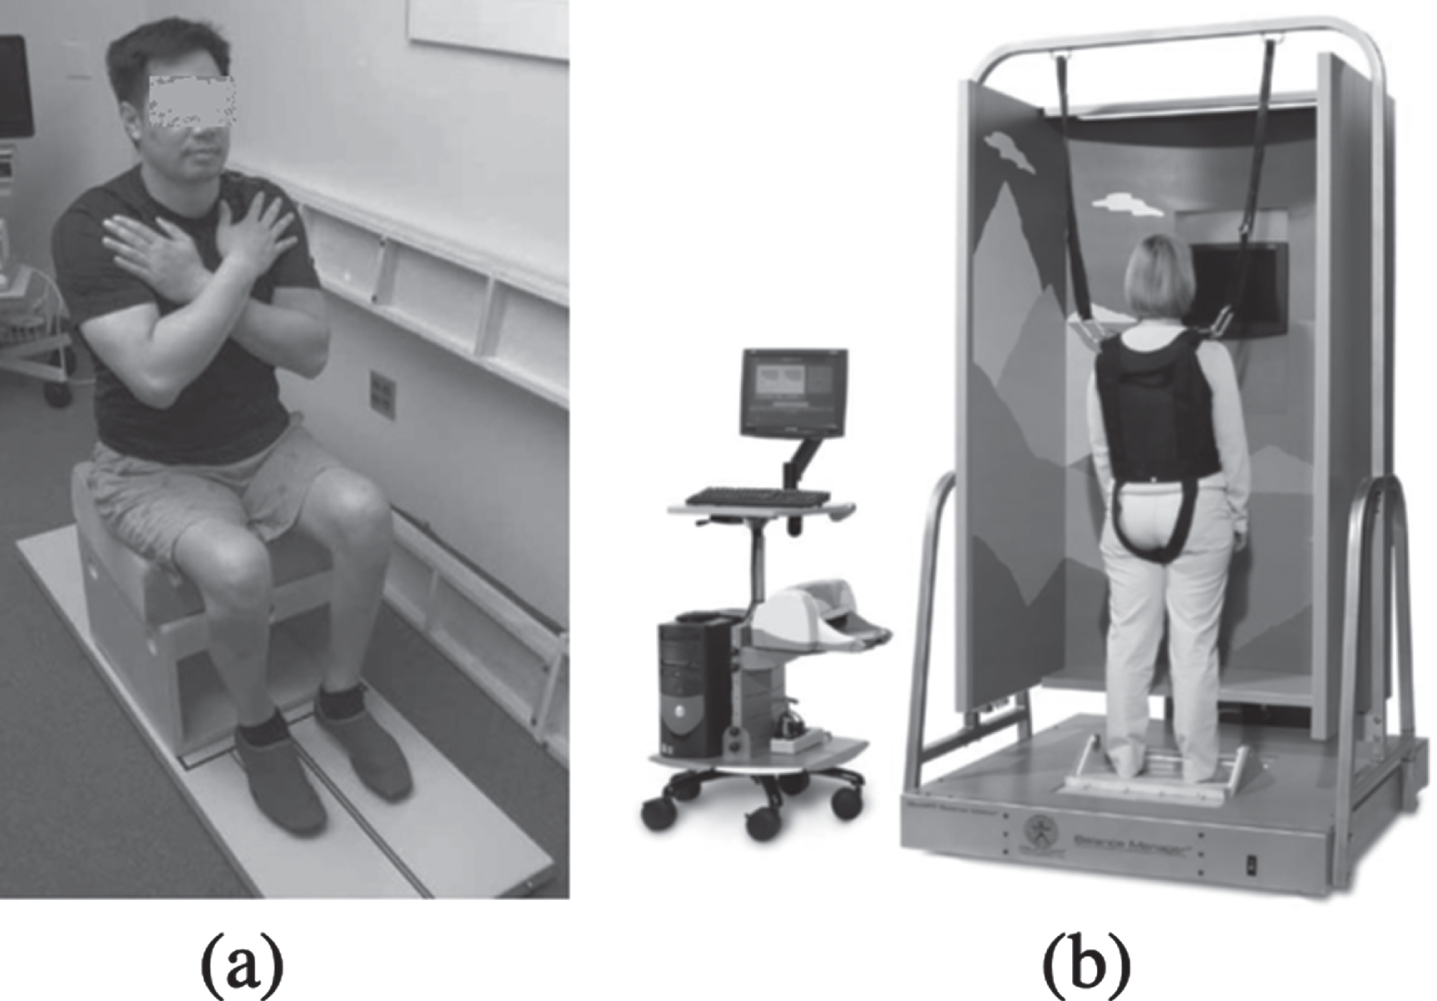 (a) Force plate used in (Harel et al., 2013) (long force plate of the SMART EquiTest CDP by Neurocom); (b) Smart Balance Master by Neurocom used in (Lemay & Nadeau, 2013).